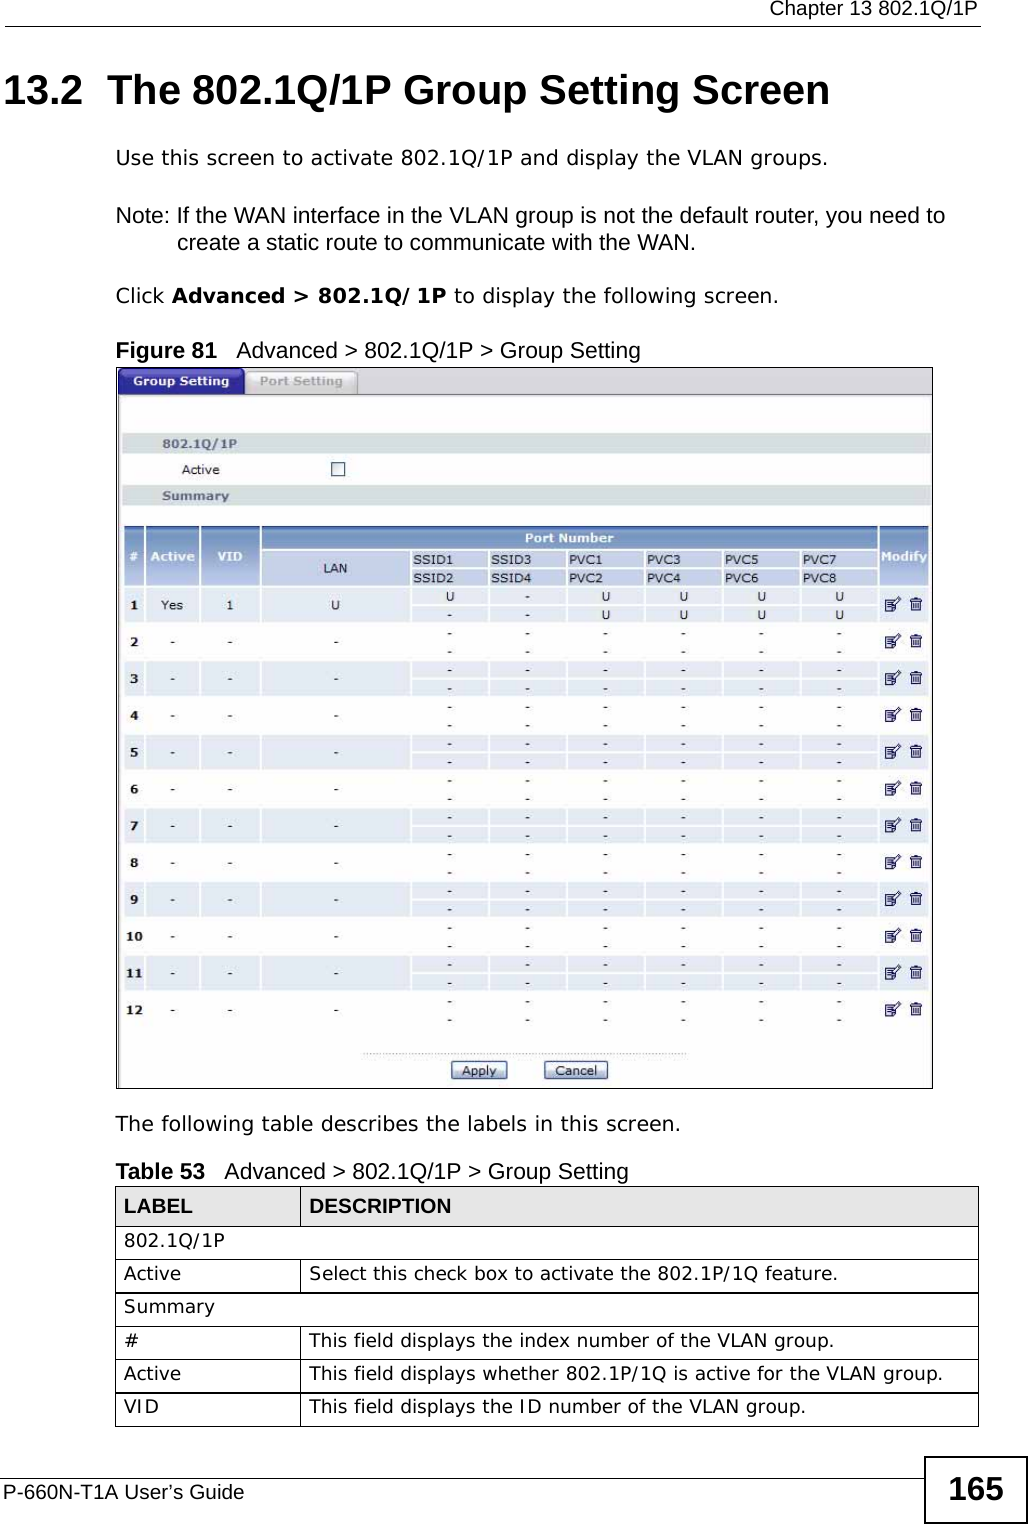  Chapter 13 802.1Q/1PP-660N-T1A User’s Guide 16513.2  The 802.1Q/1P Group Setting ScreenUse this screen to activate 802.1Q/1P and display the VLAN groups.Note: If the WAN interface in the VLAN group is not the default router, you need to create a static route to communicate with the WAN.Click Advanced &gt; 802.1Q/1P to display the following screen.Figure 81   Advanced &gt; 802.1Q/1P &gt; Group SettingThe following table describes the labels in this screen.  Table 53   Advanced &gt; 802.1Q/1P &gt; Group SettingLABEL DESCRIPTION802.1Q/1PActive Select this check box to activate the 802.1P/1Q feature.Summary# This field displays the index number of the VLAN group.Active This field displays whether 802.1P/1Q is active for the VLAN group.VID This field displays the ID number of the VLAN group.